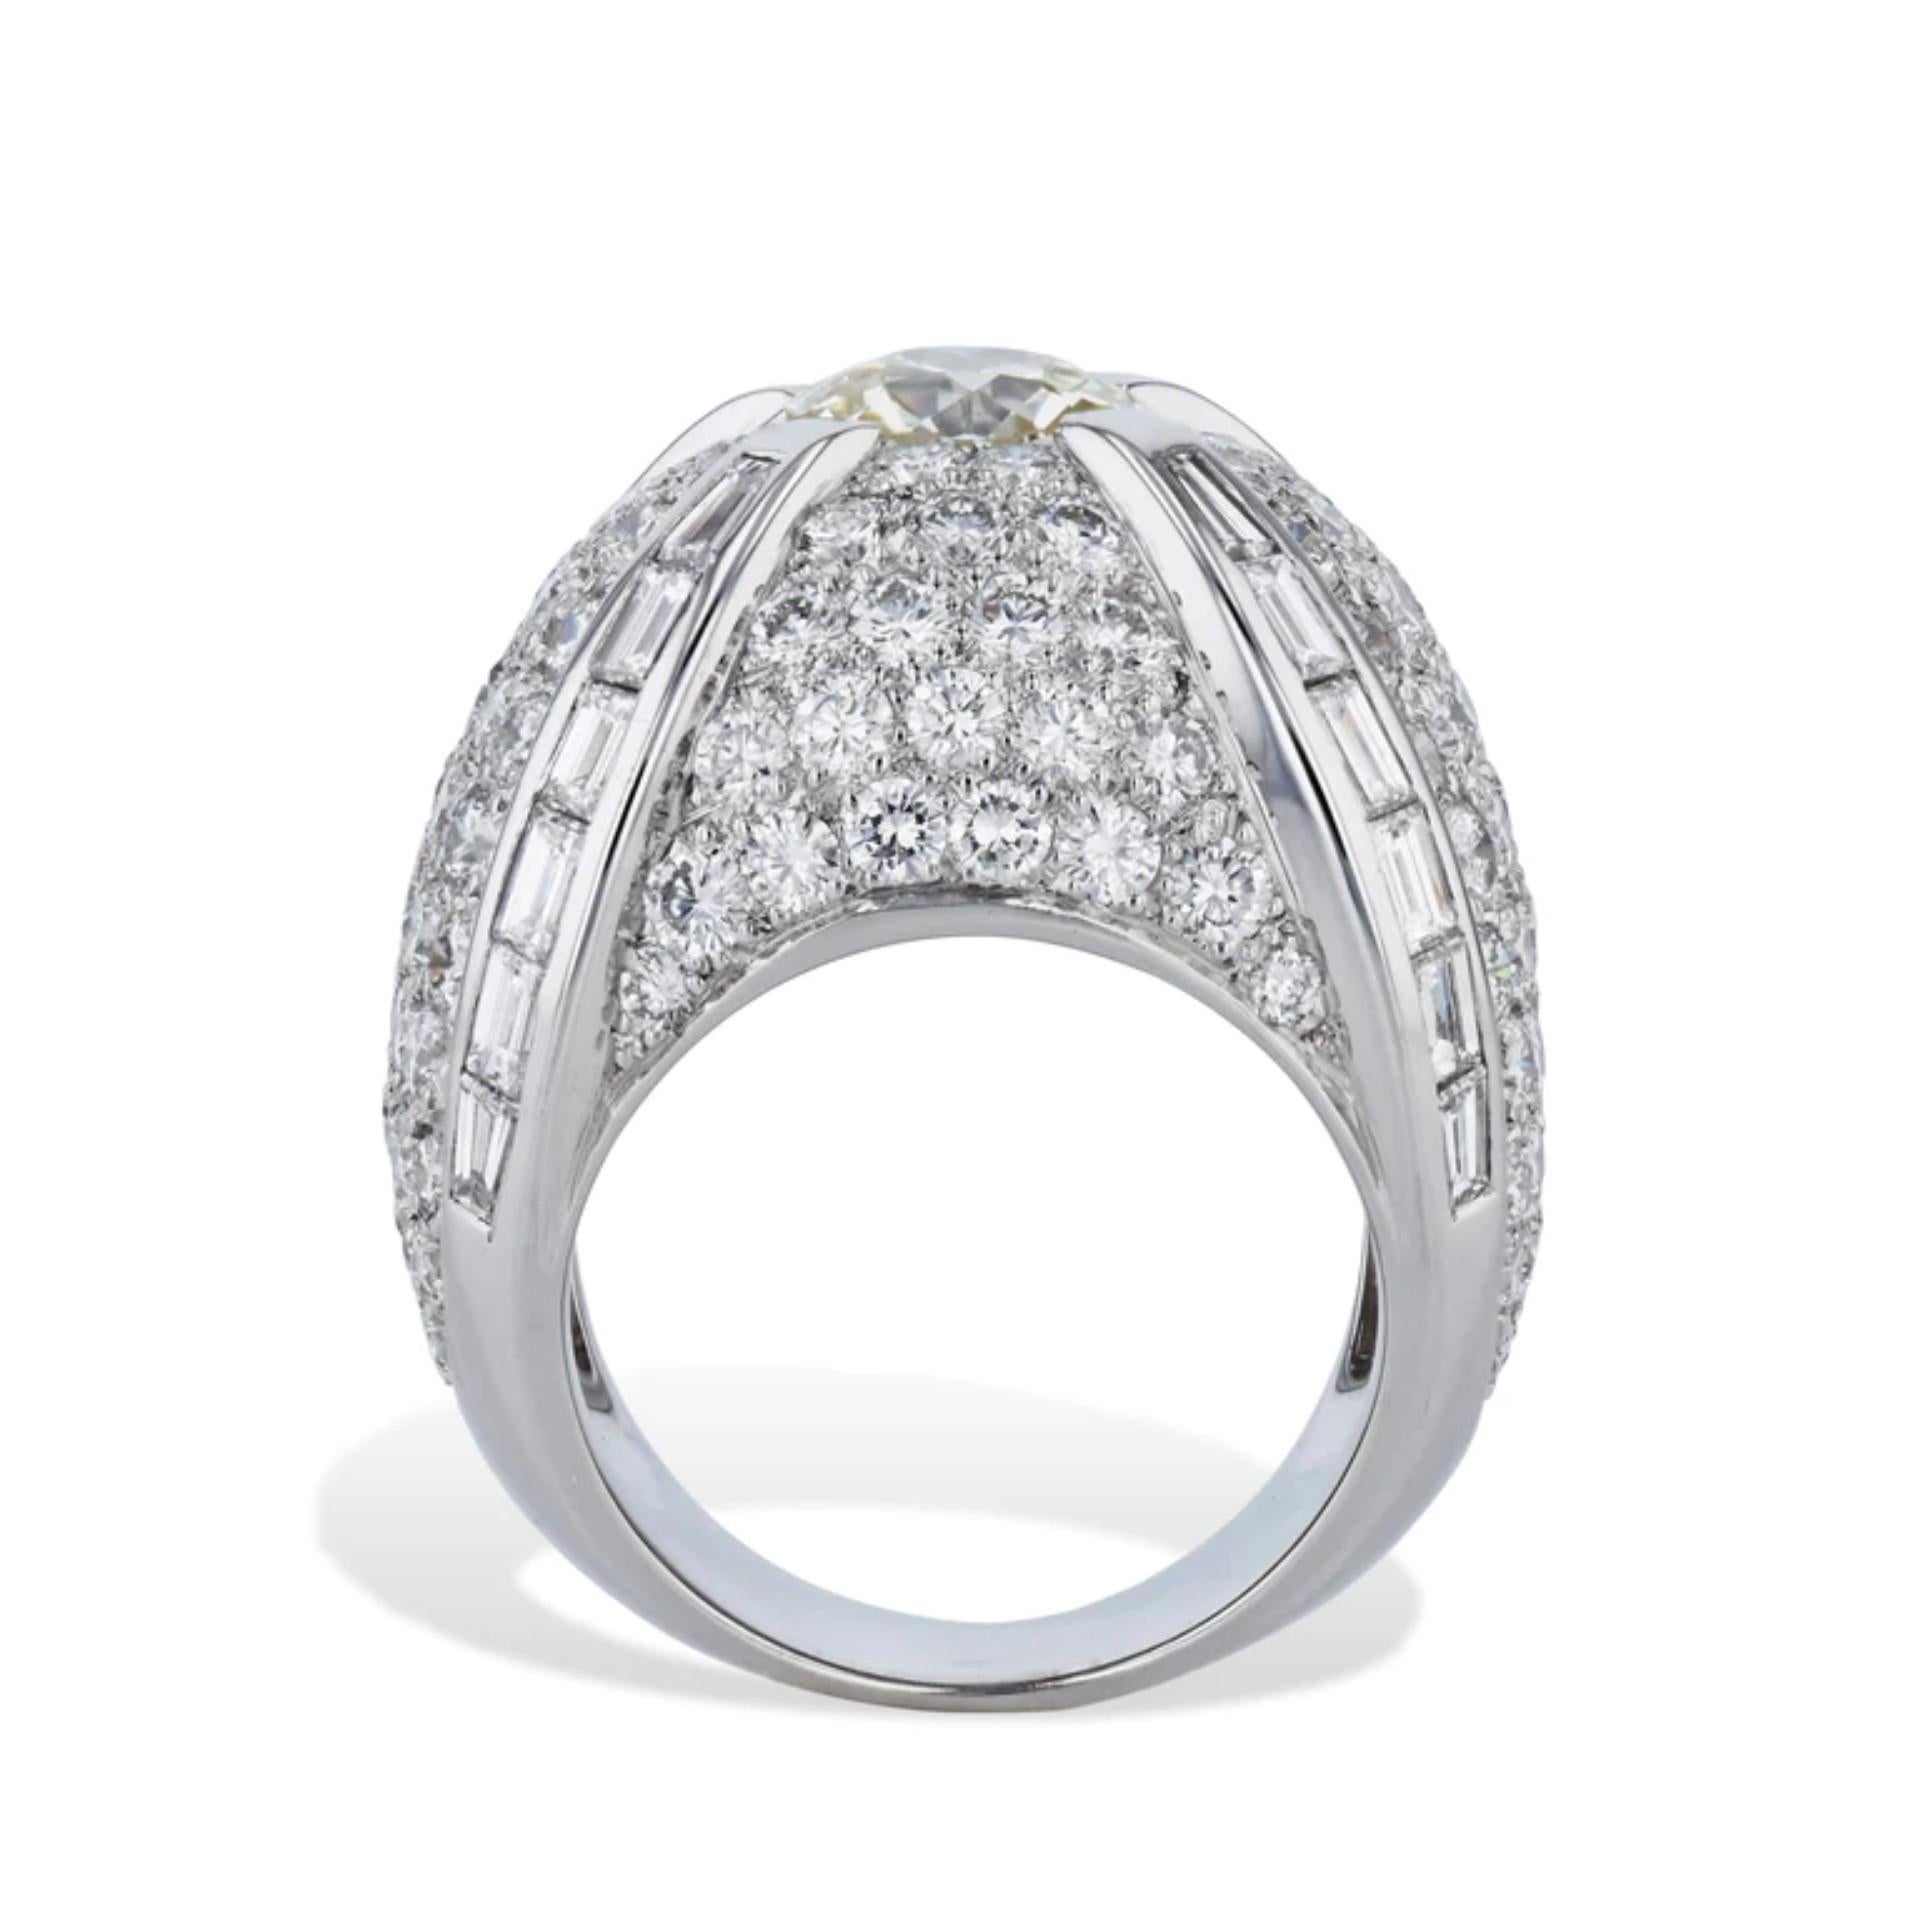 This stunning 18 karat white gold French hallmark dome ring is truly breathtaking! 

It has an 1.49 carat Old European cut center diamond that is K/L in color and VS2 in clarity. 

It also has an additional 122 pieces of round brilliant cut pave